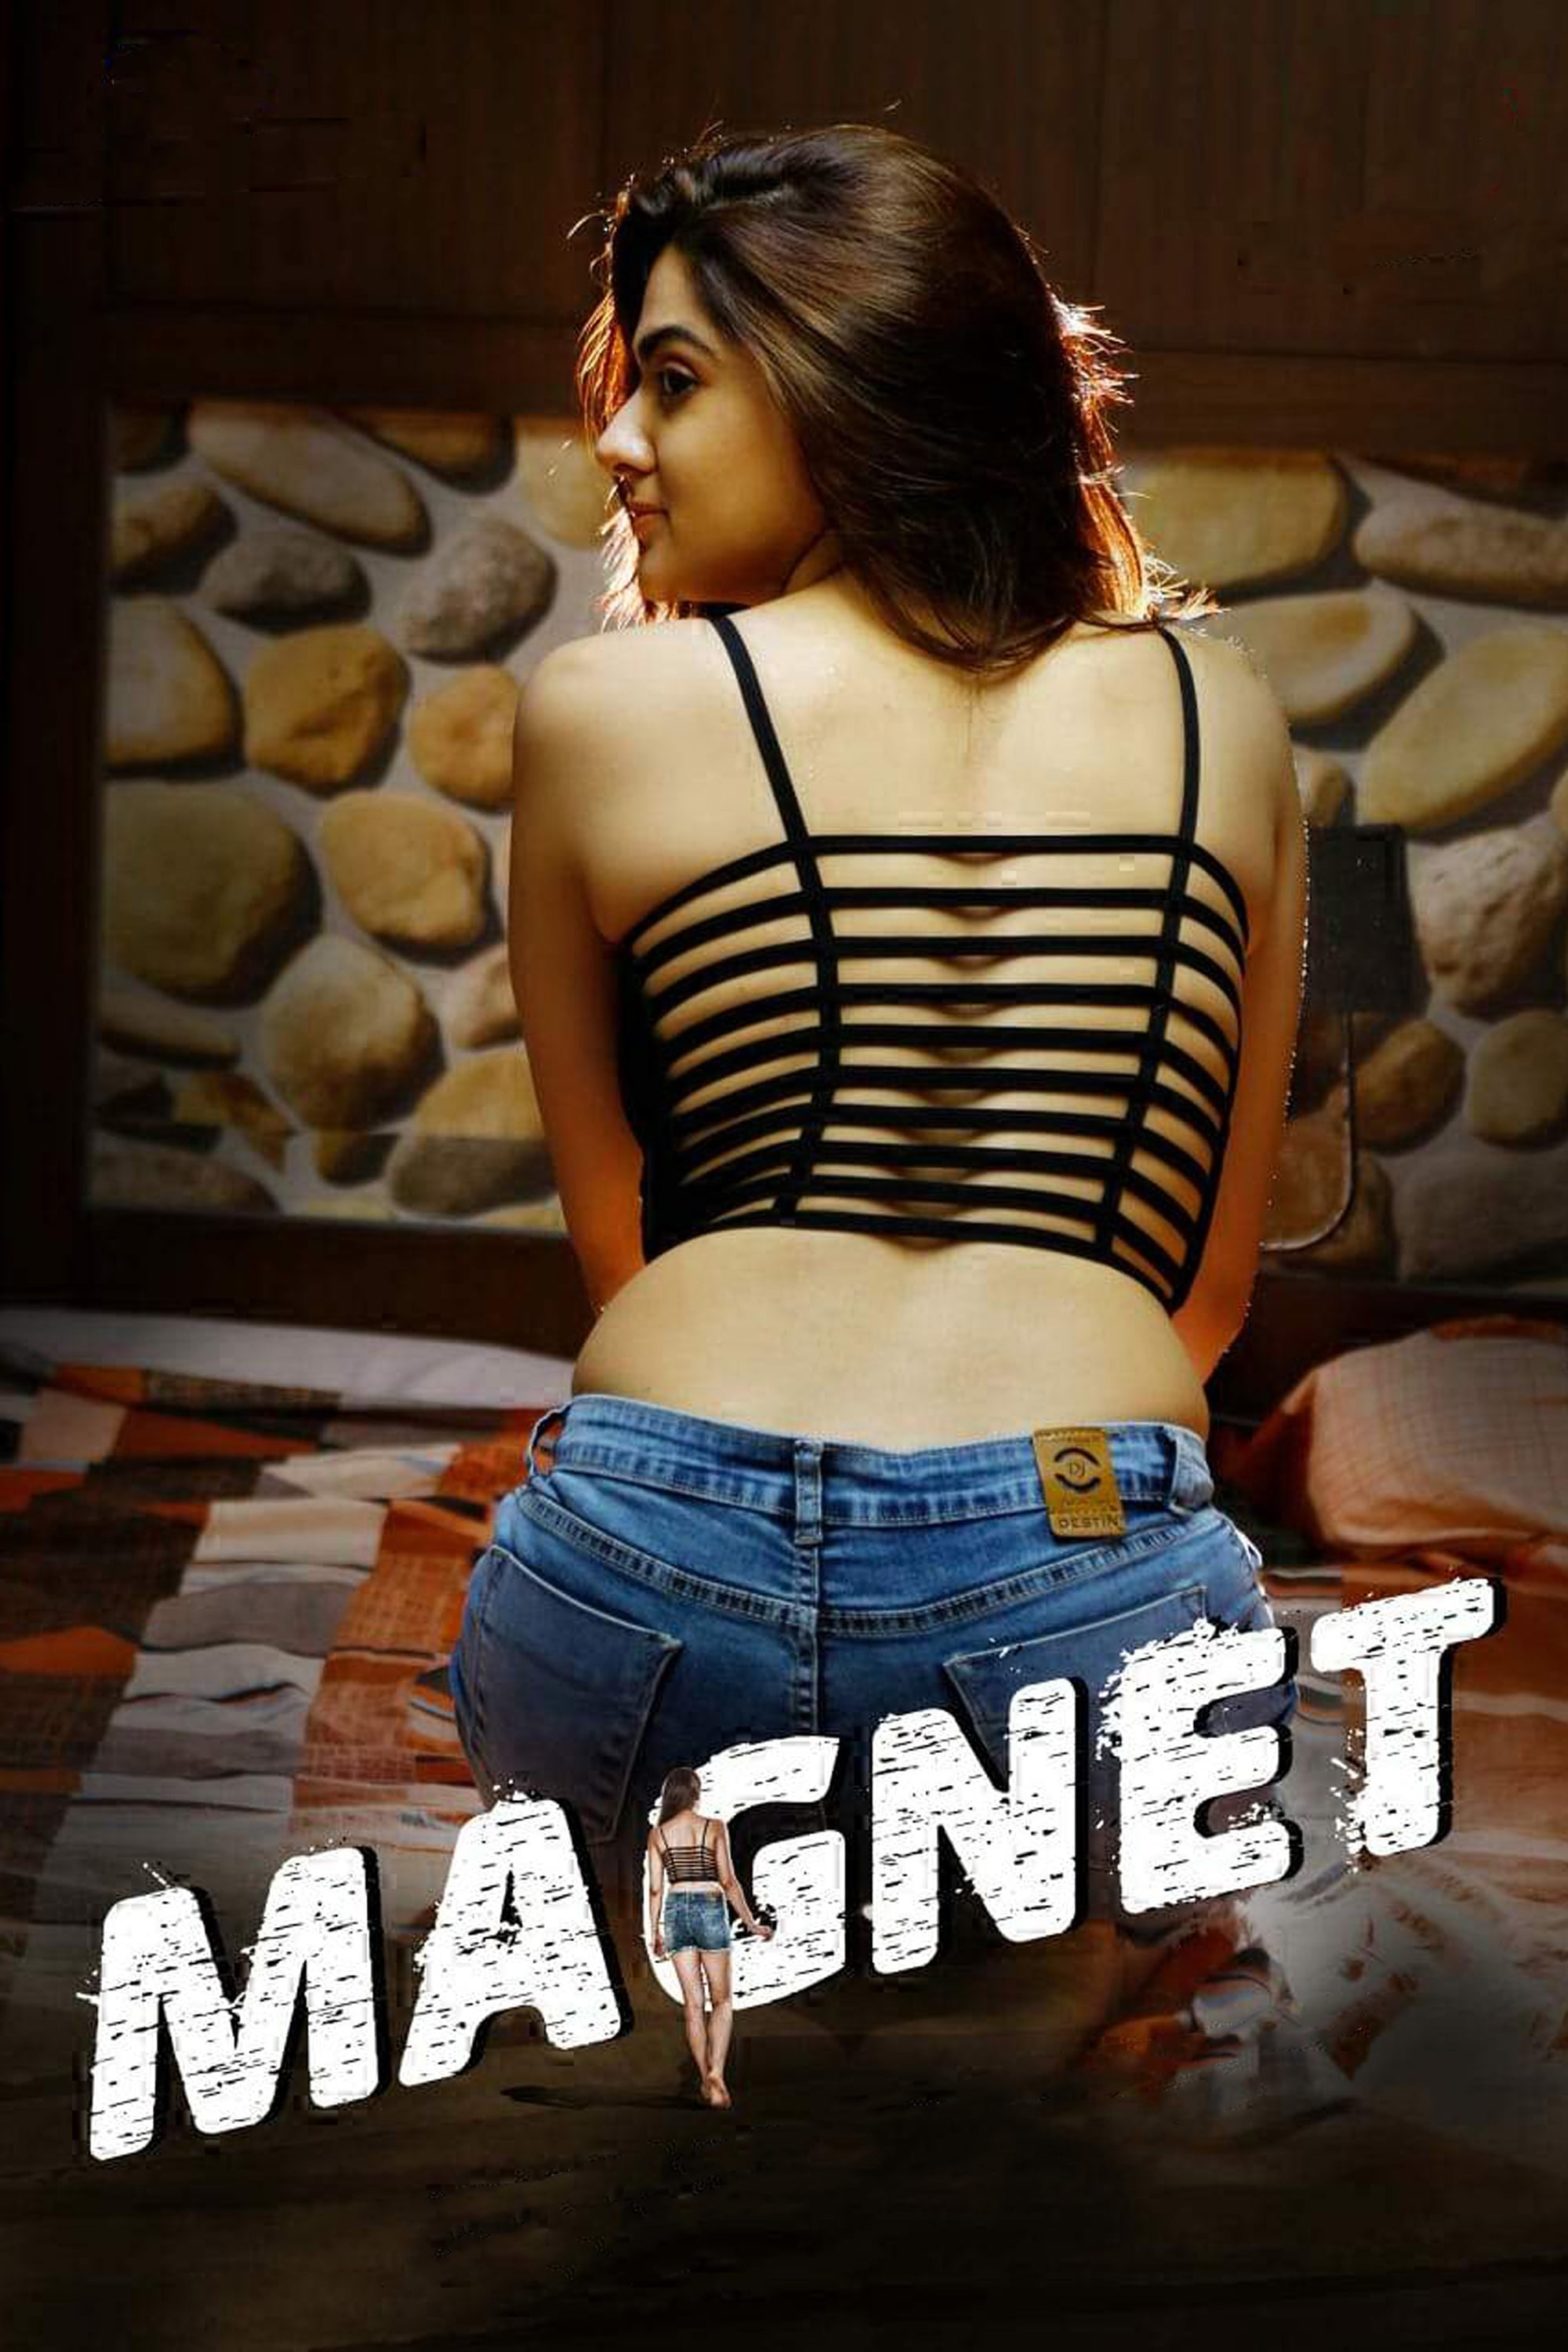 Poster for the movie "Magnet"